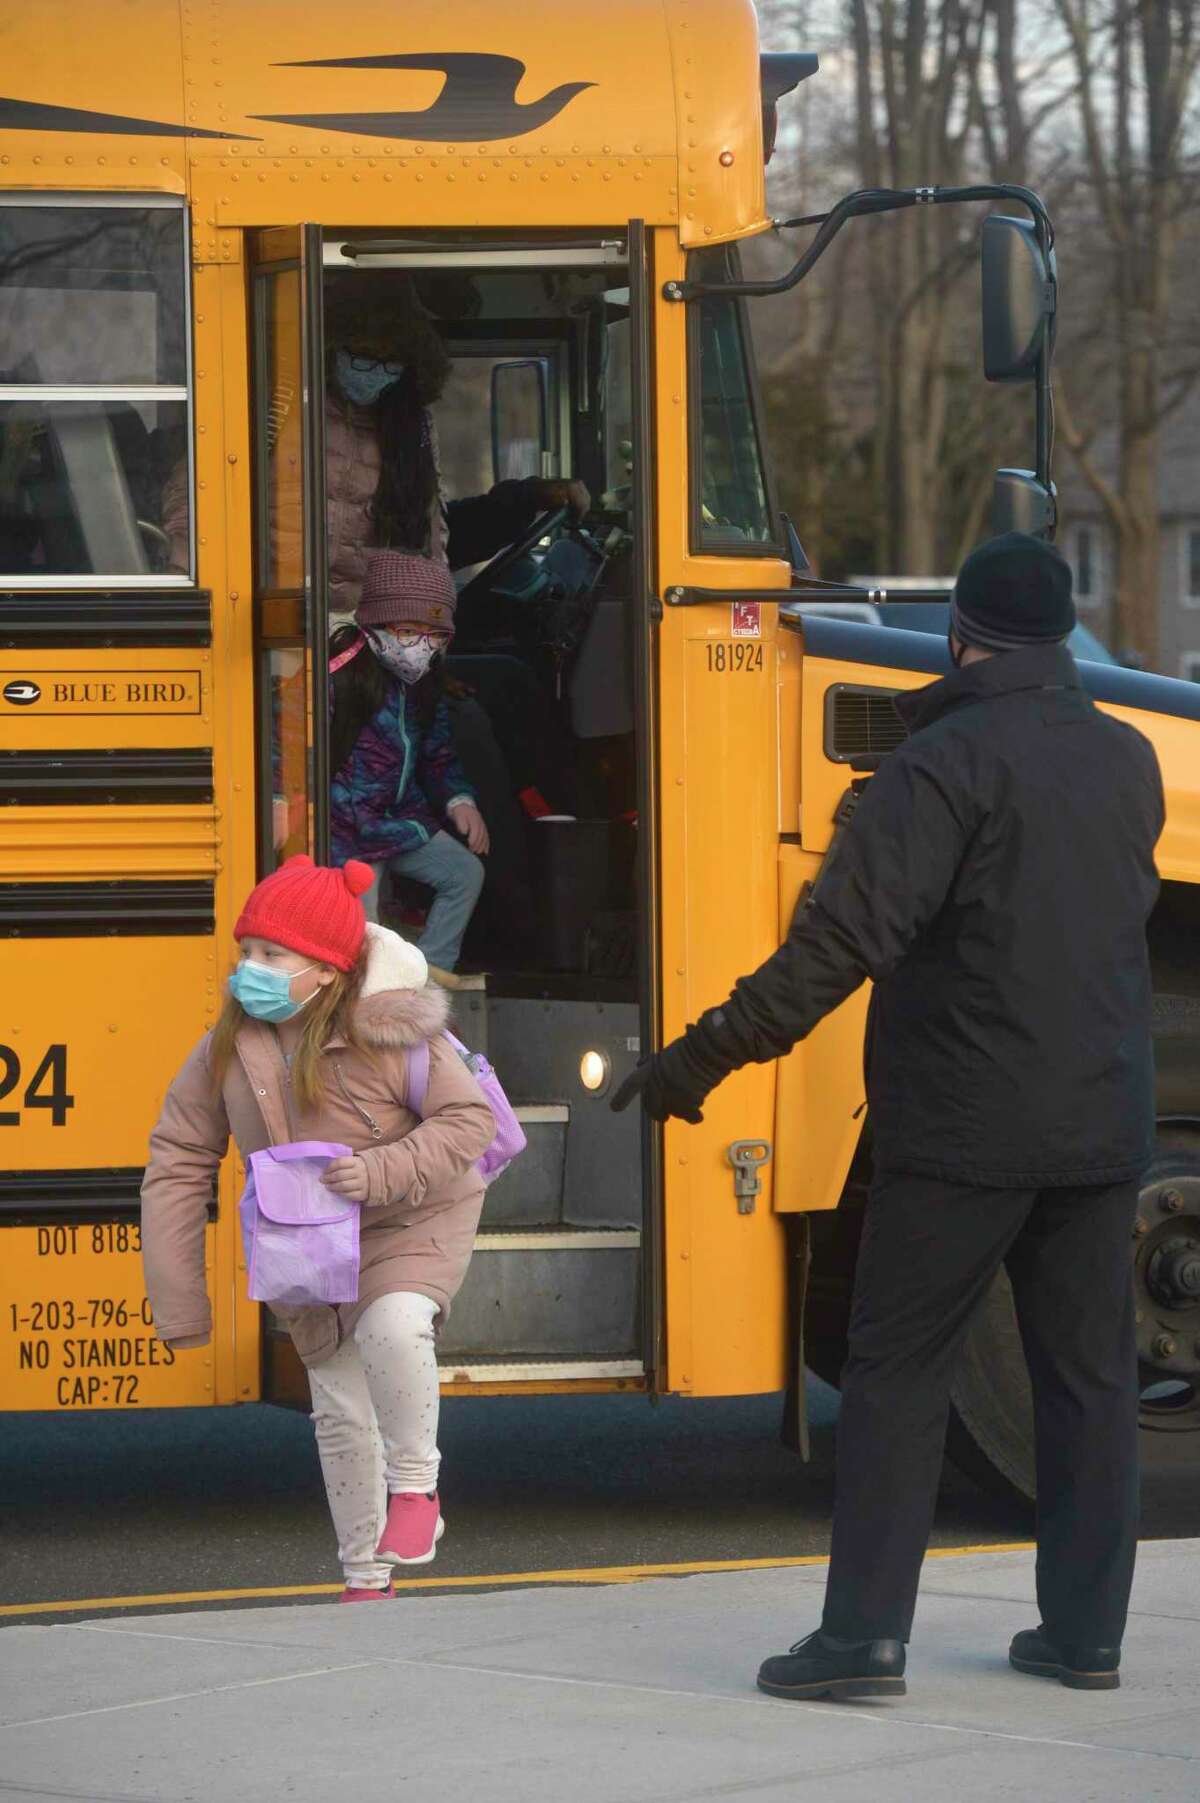 Stadley Rough Elementary School principal Lenny Cerlich welcomes students and their bus driver back to school for the first time since March of last year. Tuesday, January 19, 2021, in Danbury, Conn.